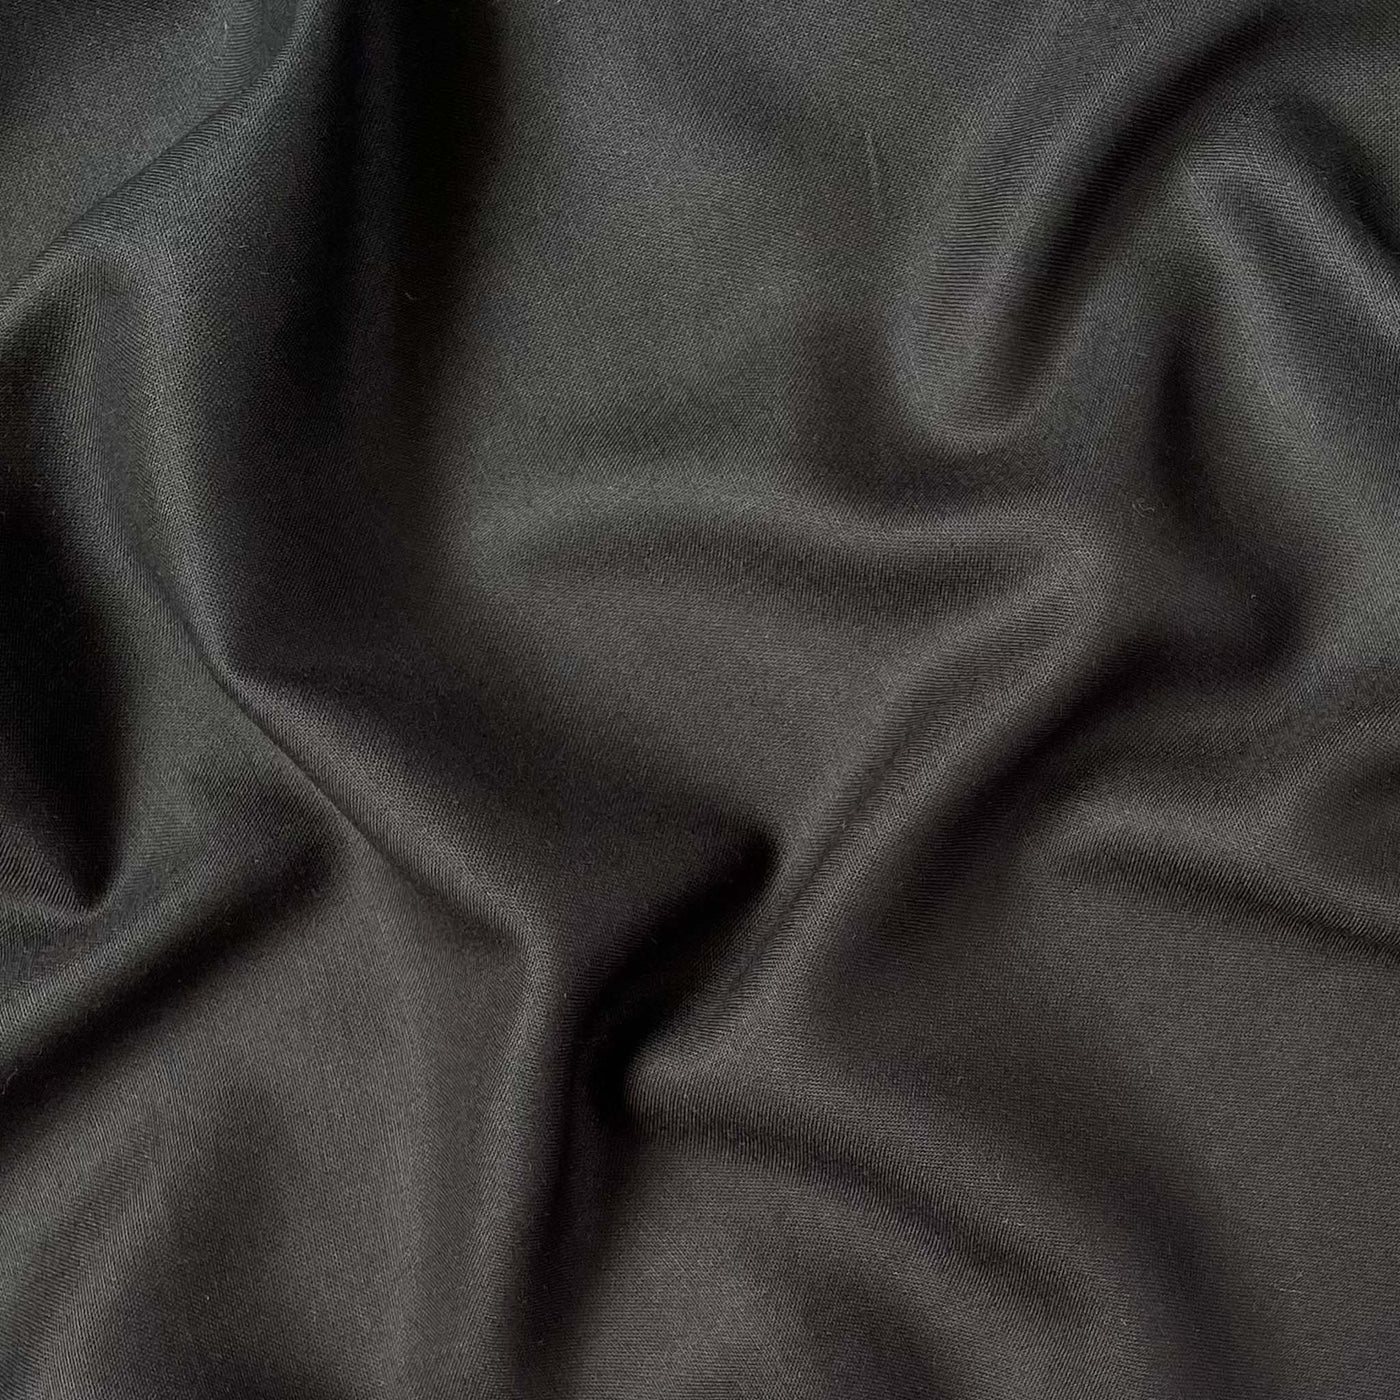 Rayon Fabric Fabric Jade Black Color Pure Rayon Fabric (Width 36 Inches)